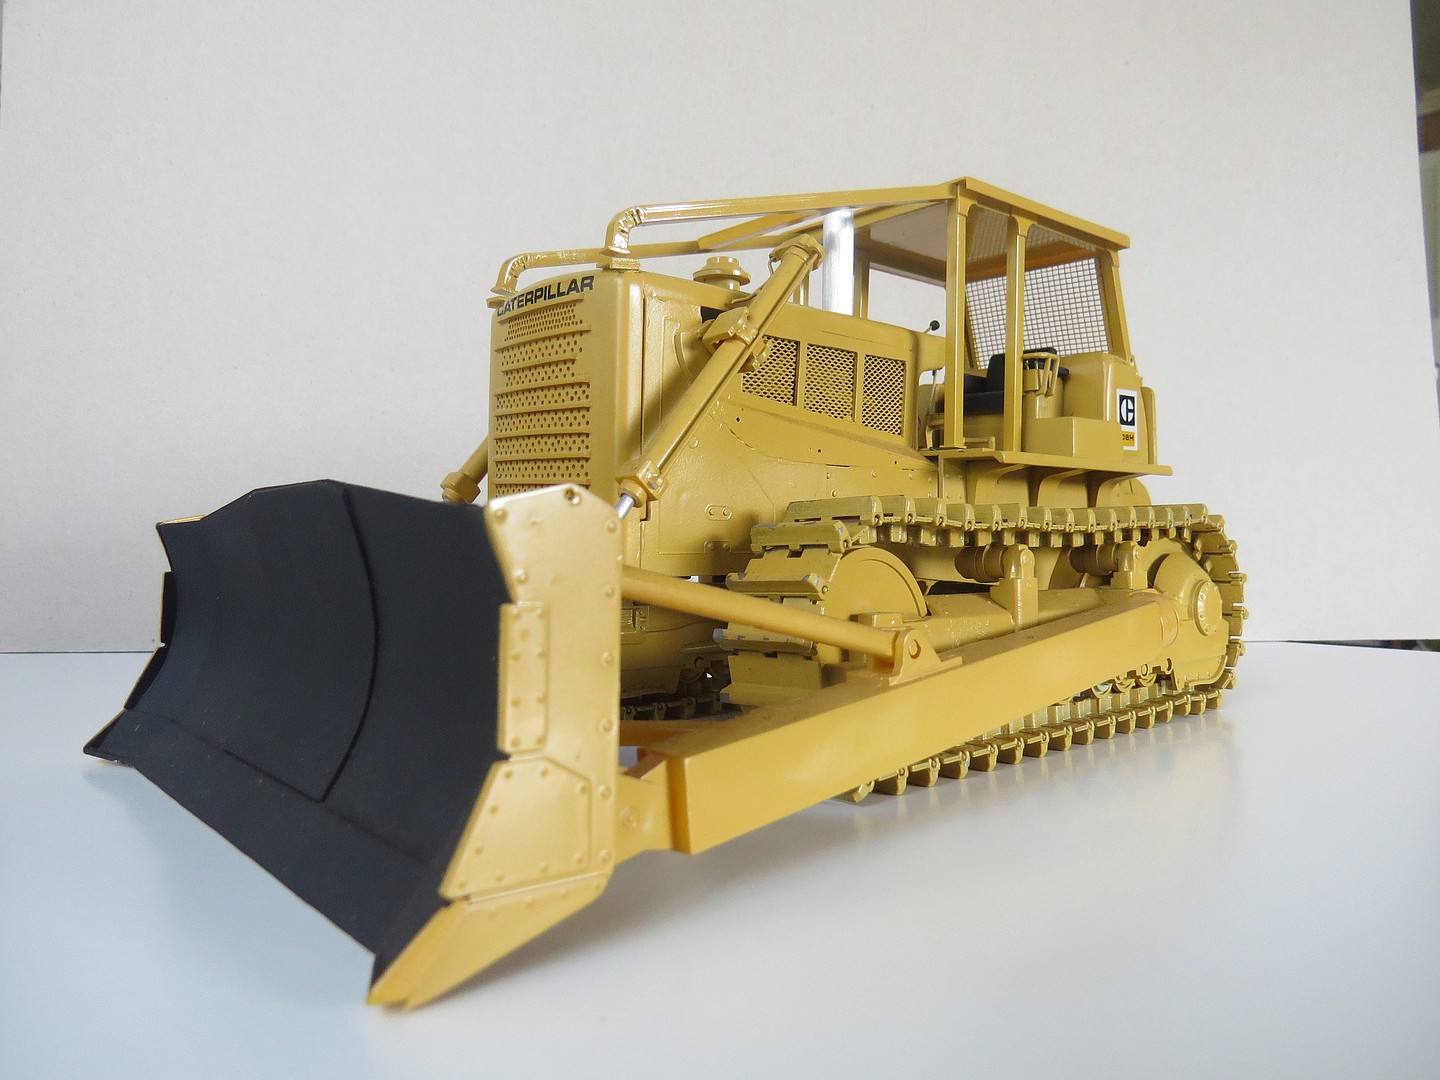 ENGINE COMPARTMENT GUARD KIT FOR AMT 1/25 SCALE BULLDOZER MODEL 